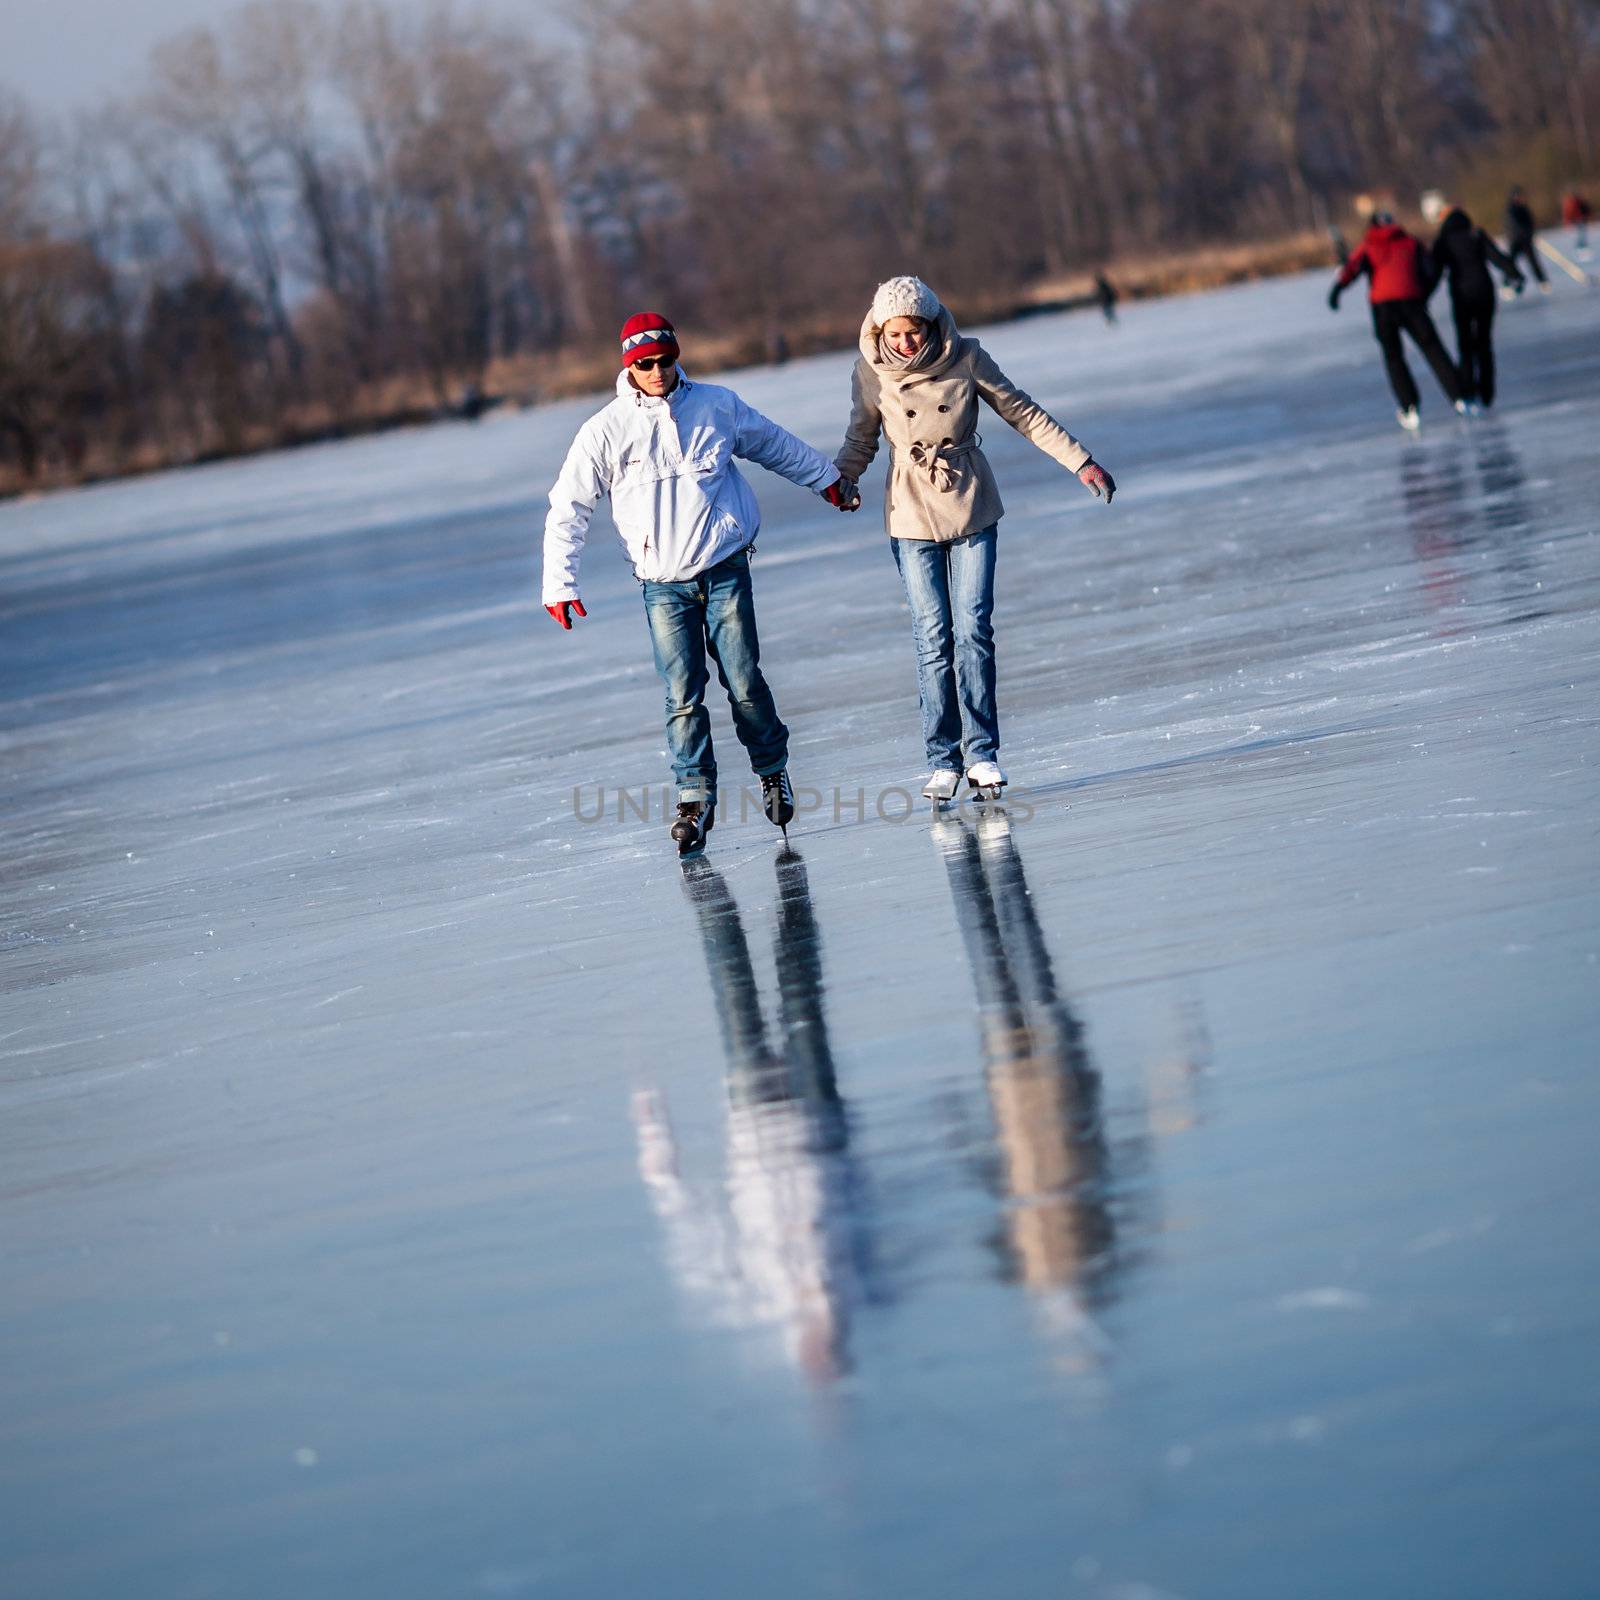 Couple ice skating outdoors on a pond by viktor_cap